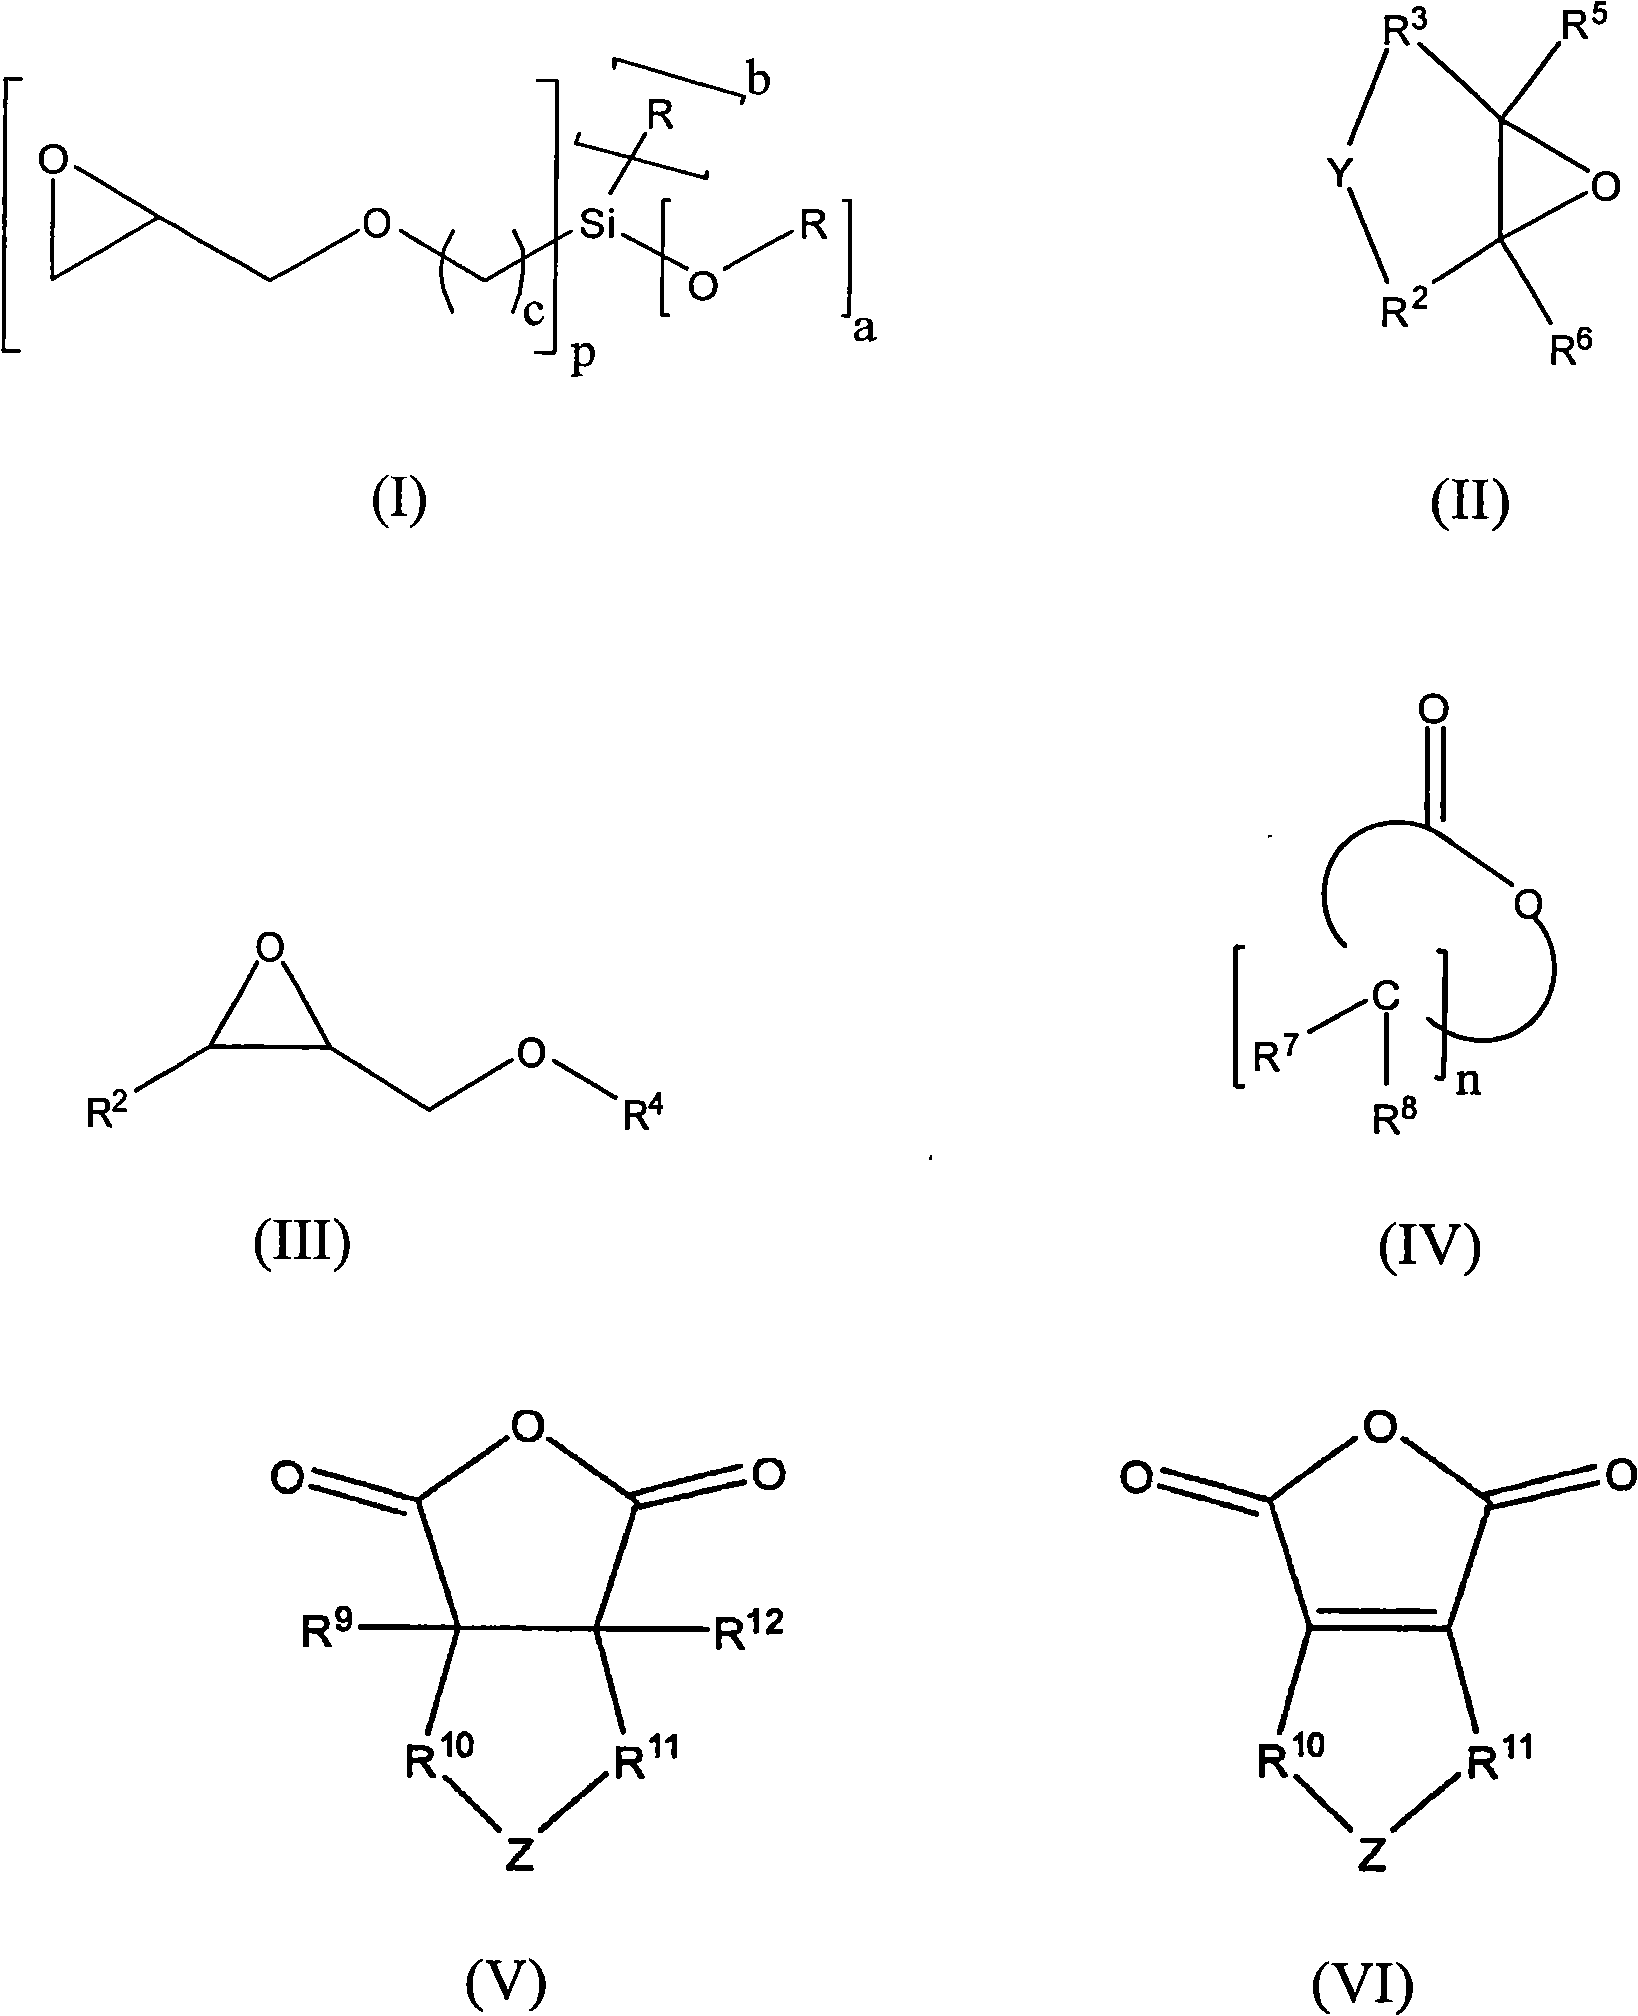 New polyether alcohols containing alkoxysilyl groups and method for production